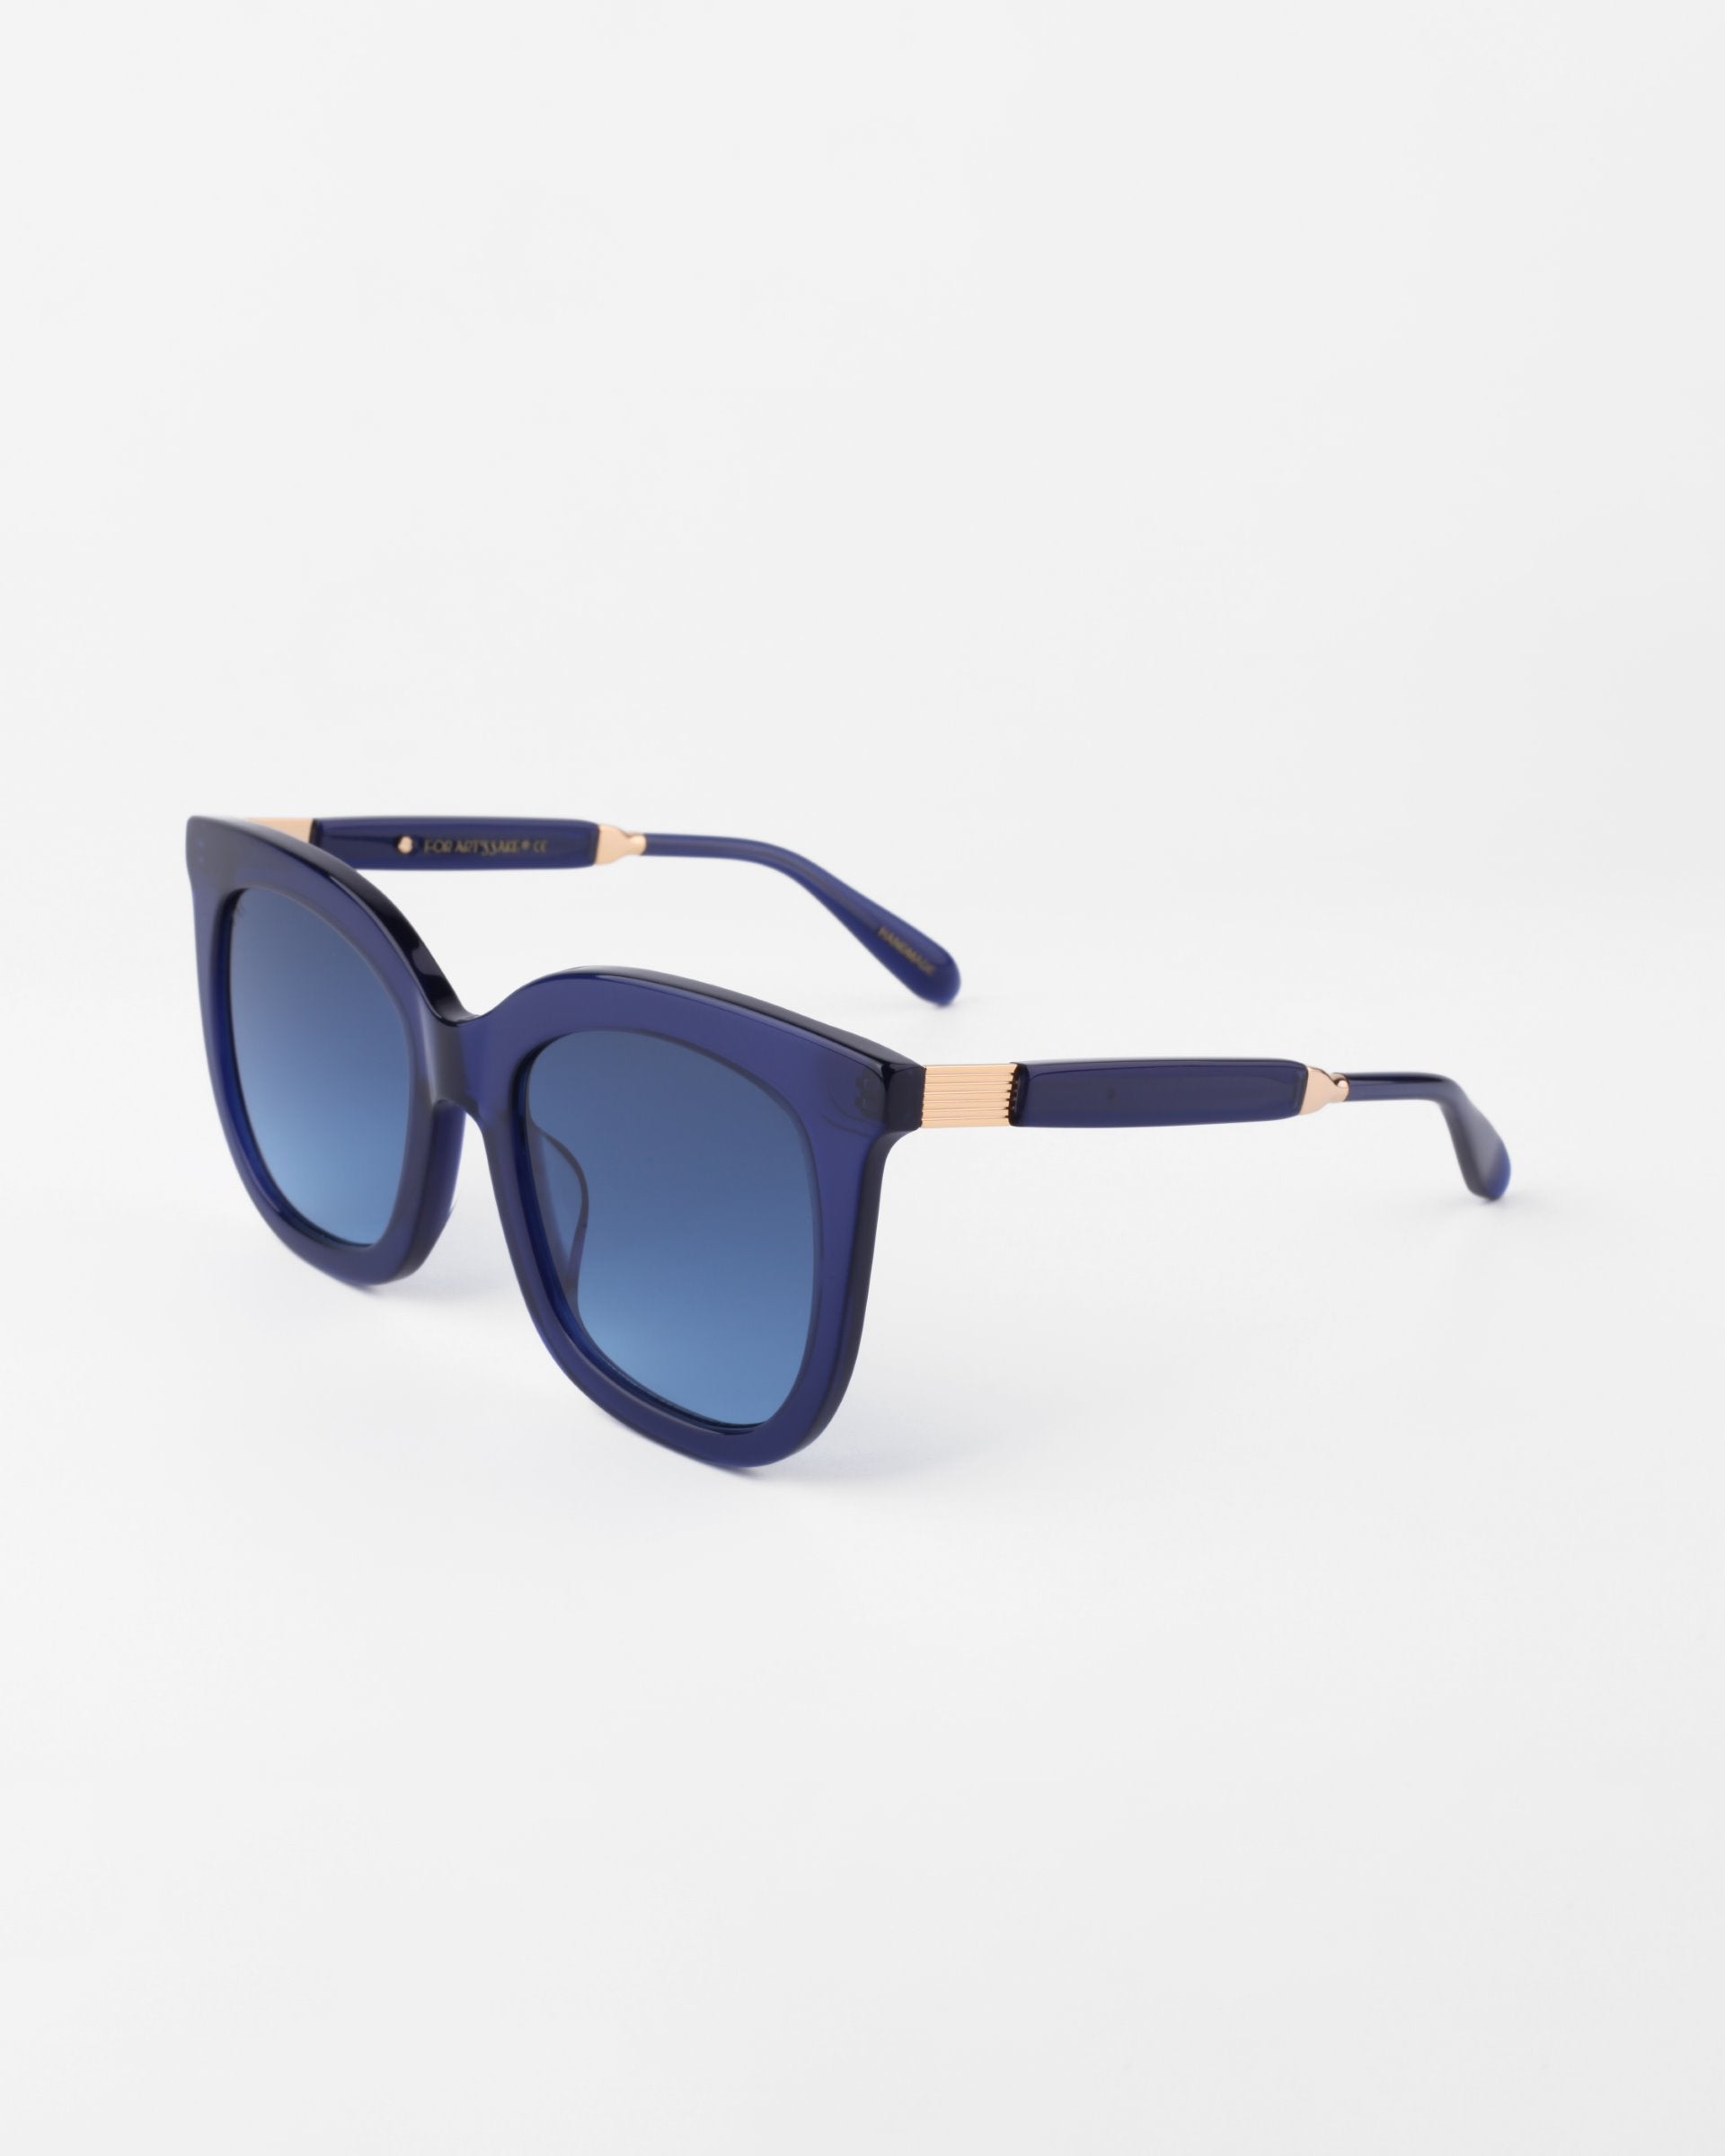 A pair of Riverside sunglasses by For Art&#39;s Sake® with square, shatter-resistant, dark blue lenses and a handmade acetate frame. The temples also feature gold-plated detailing and are similarly dark blue, adding an elegant touch to the design. The Riverside sunglasses are set against a plain white background.